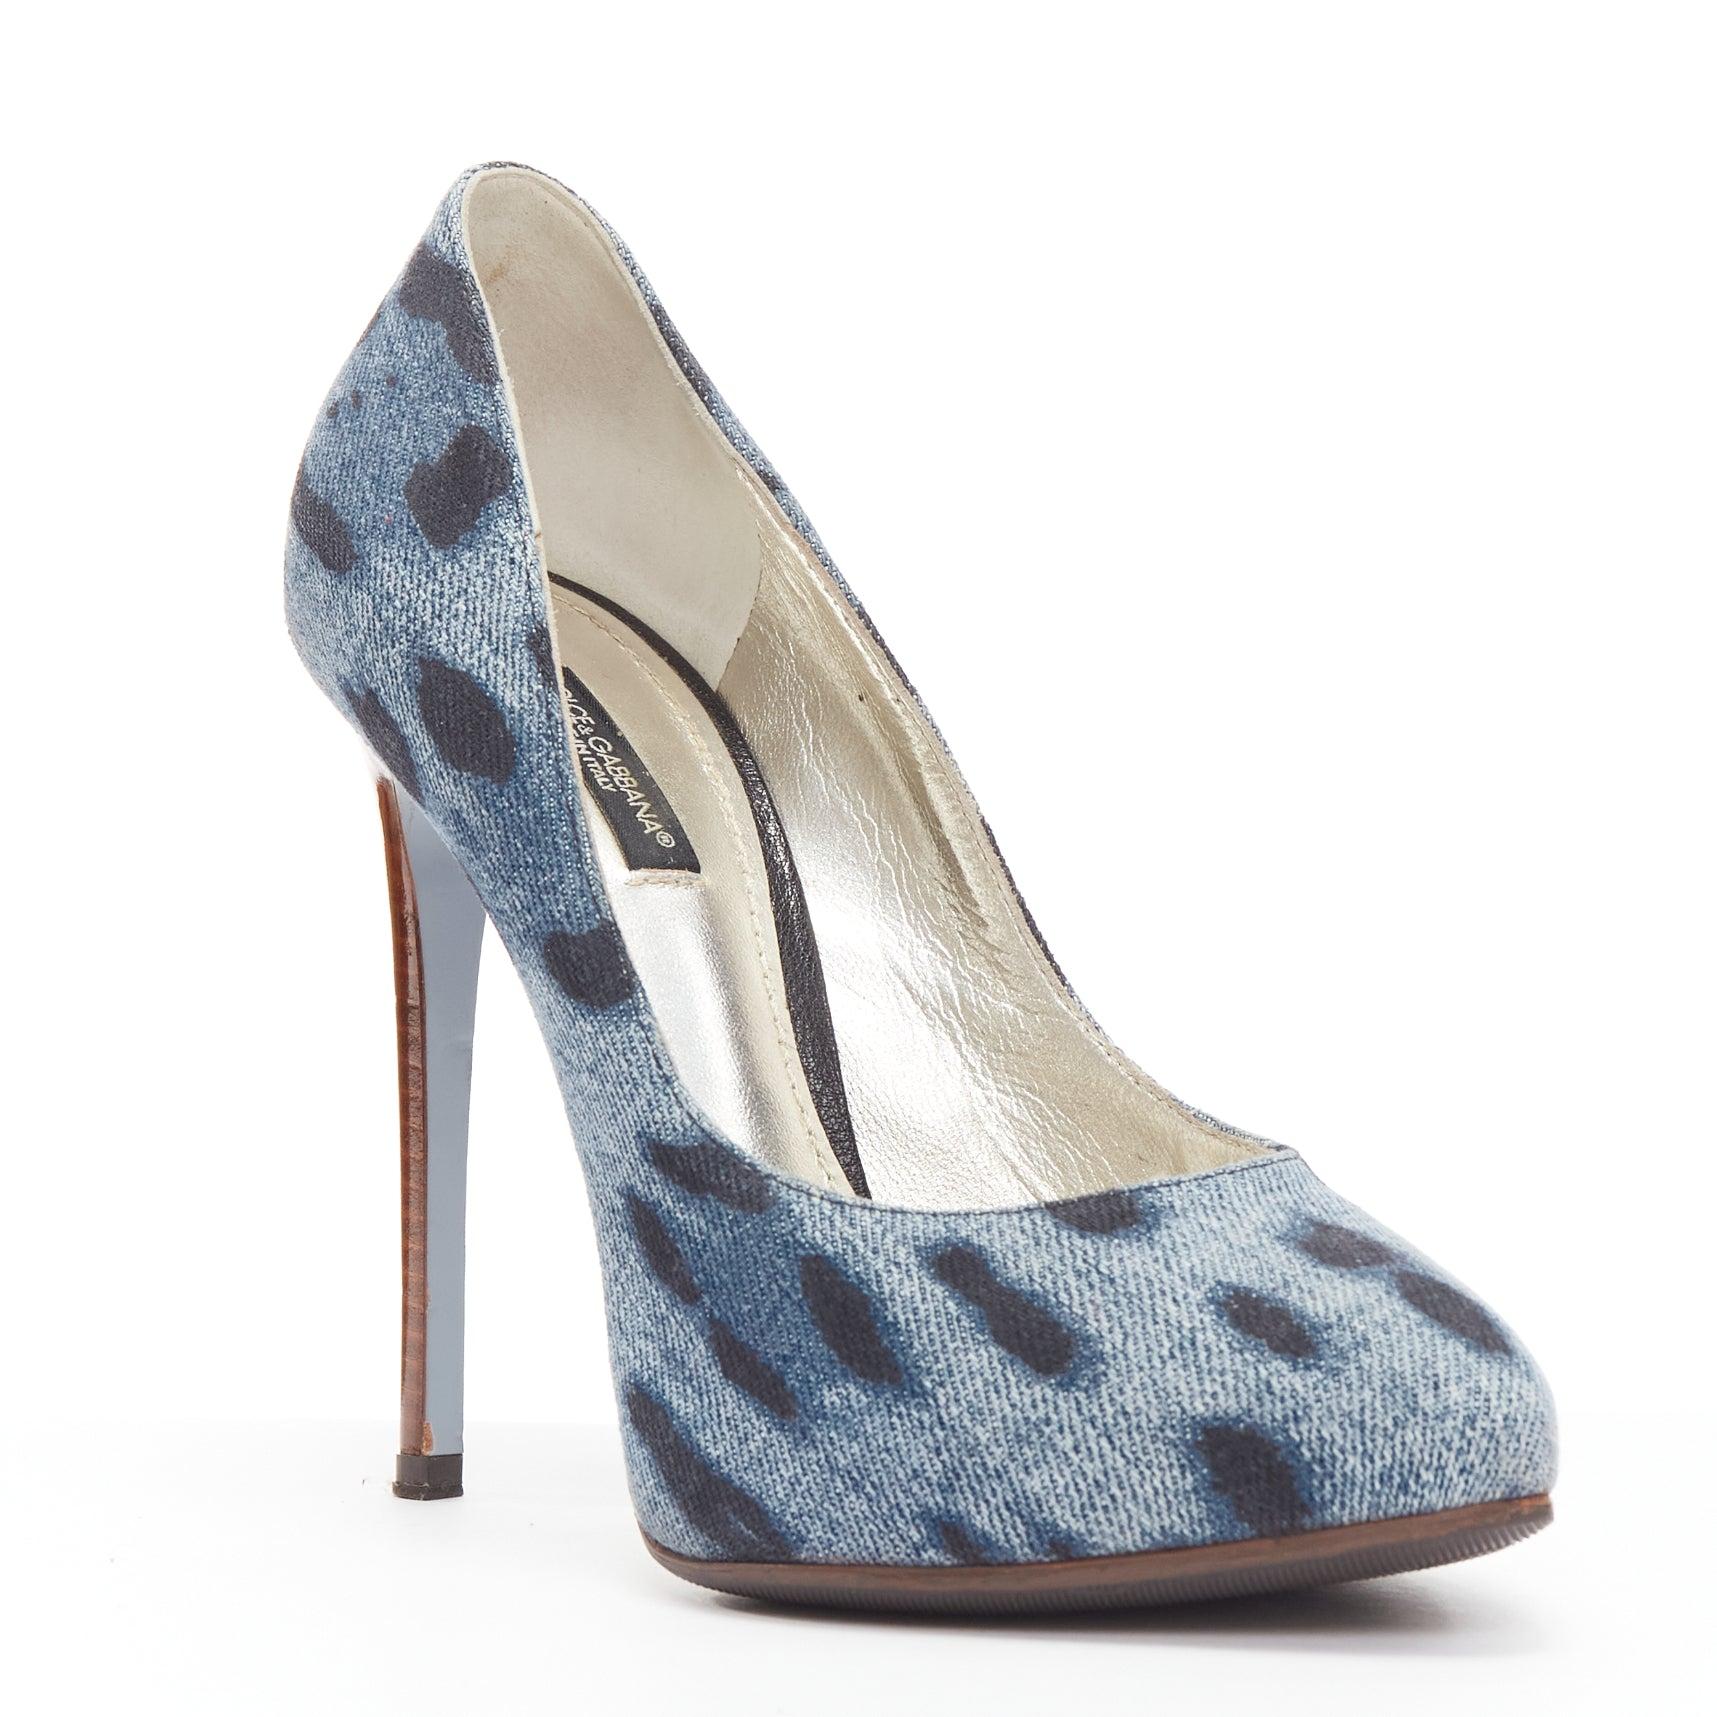 DOLCE GABBANA black blue leopard spot print denim wood heel pump EU37
Reference: NKLL/A00128
Brand: Dolce Gabbana
Material: Denim
Color: Blue
Pattern: Animal Print
Lining: Gold Leather

CONDITION:
Condition: Very good, this item was pre-owned and is